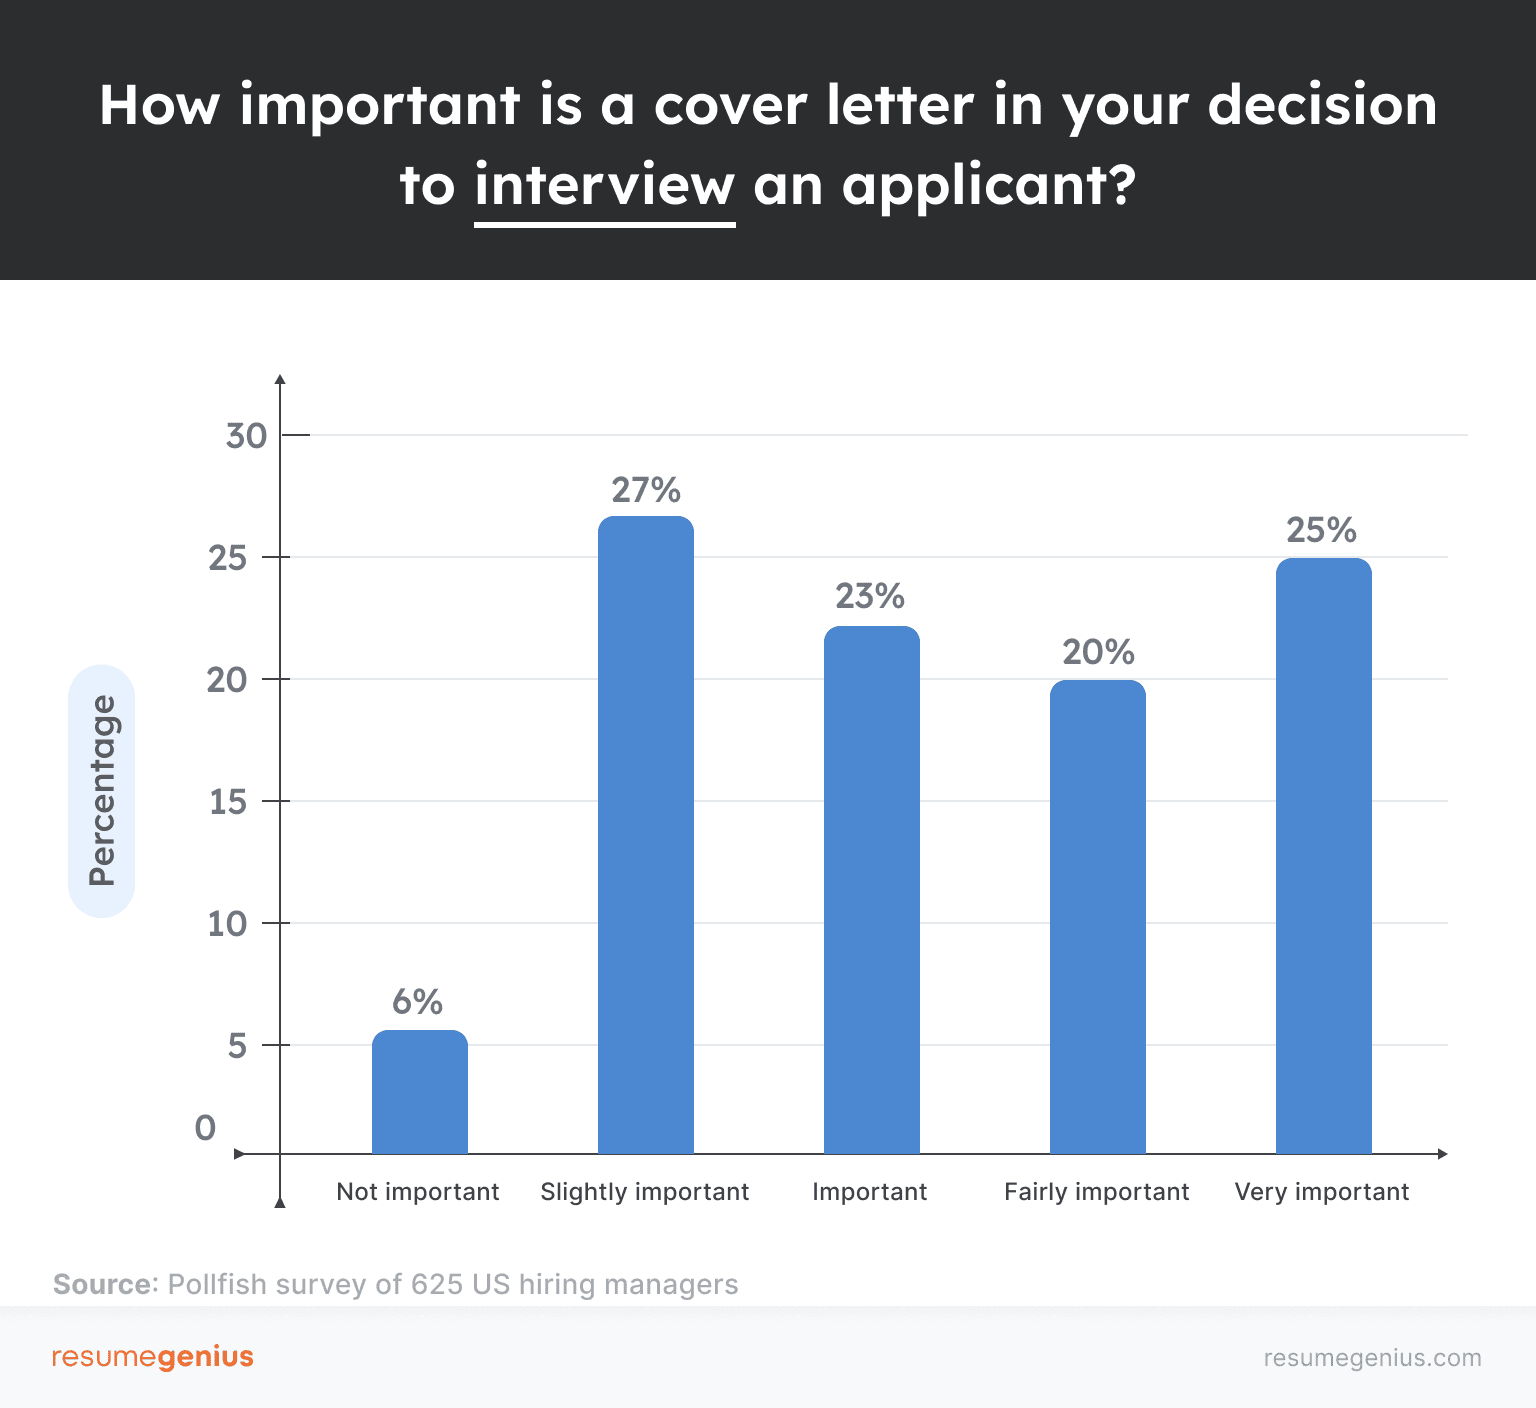 Percentage of hiring managers who rated cover letters as varying levels of important in their decisions to interview applicants